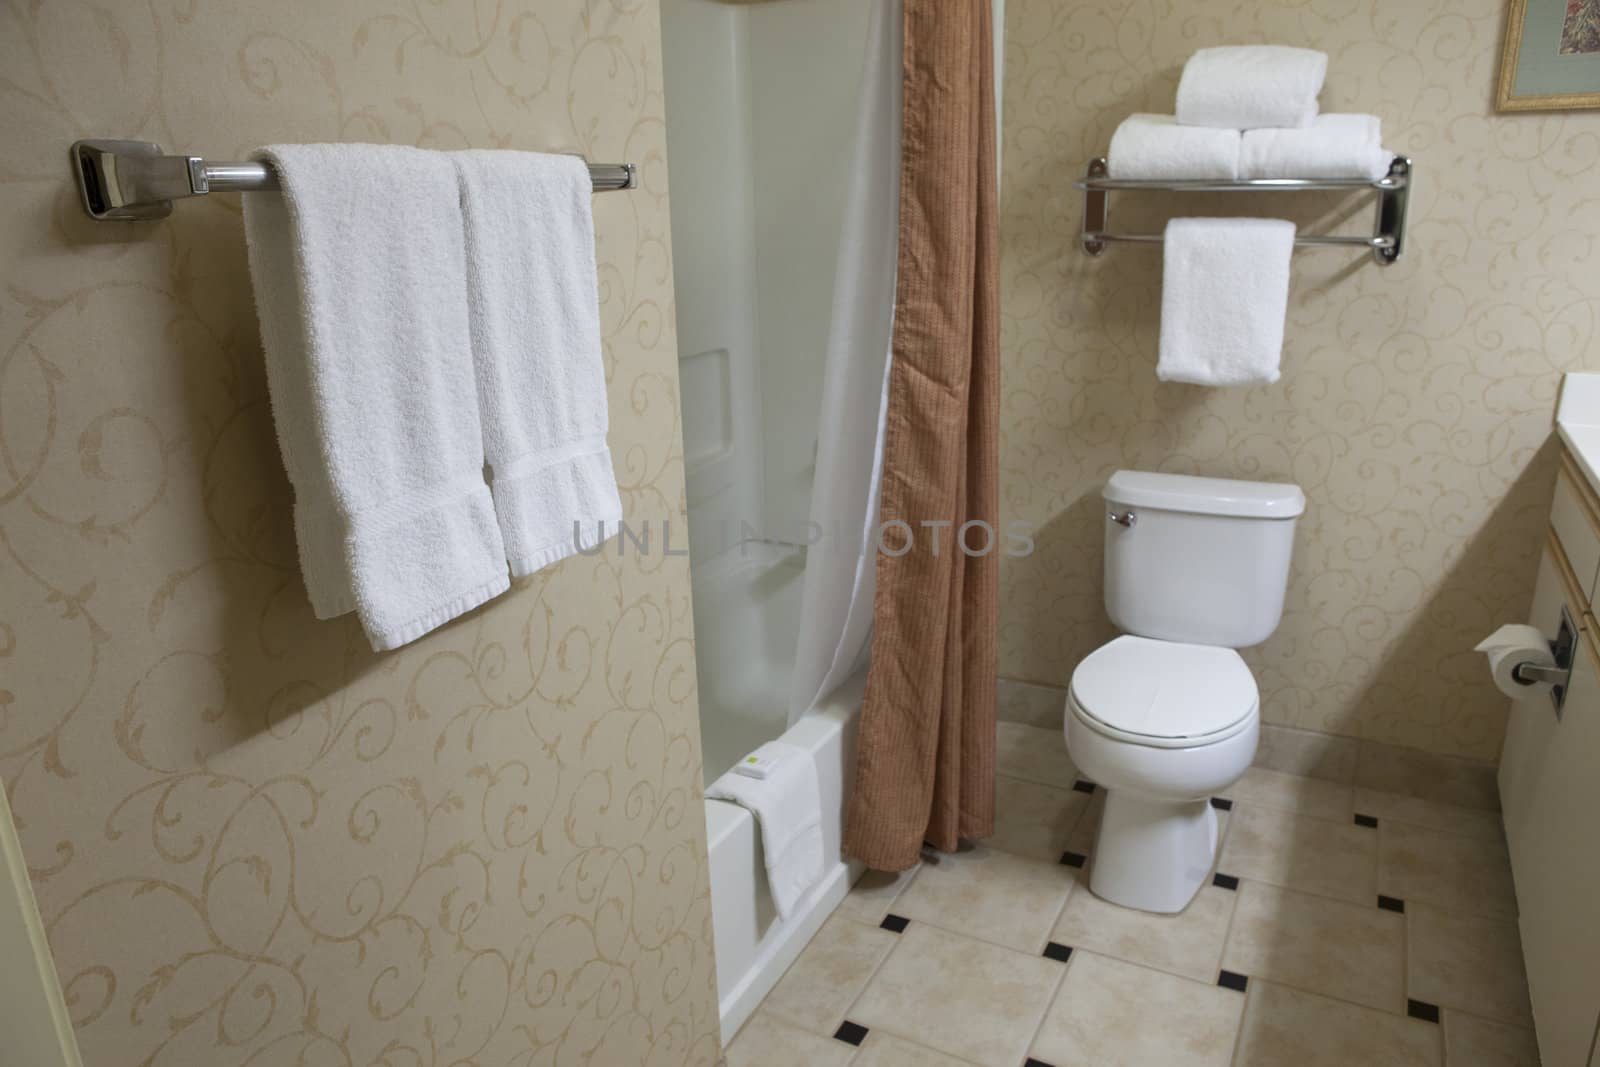 3-Star hotel bathroom with clean linens.